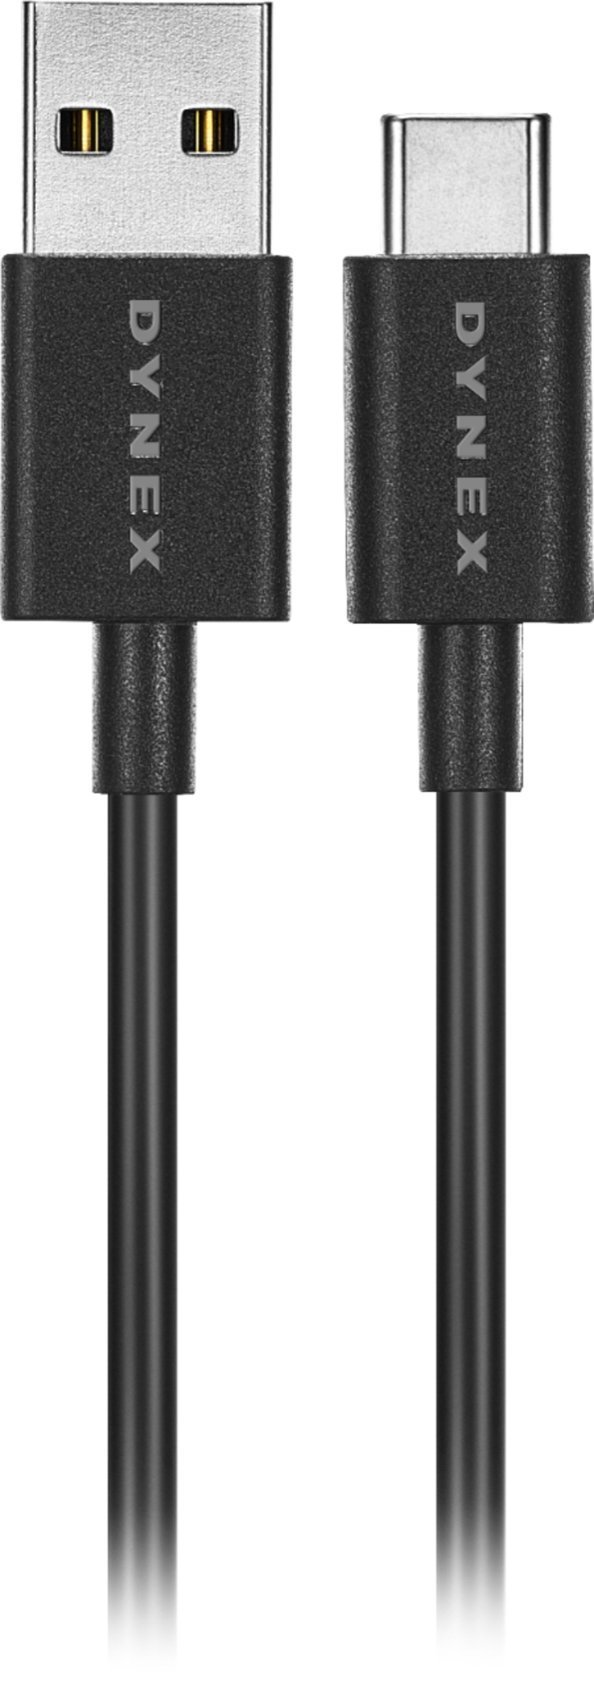 3' USB Type C-to-USB Type A Cable 2-Pack